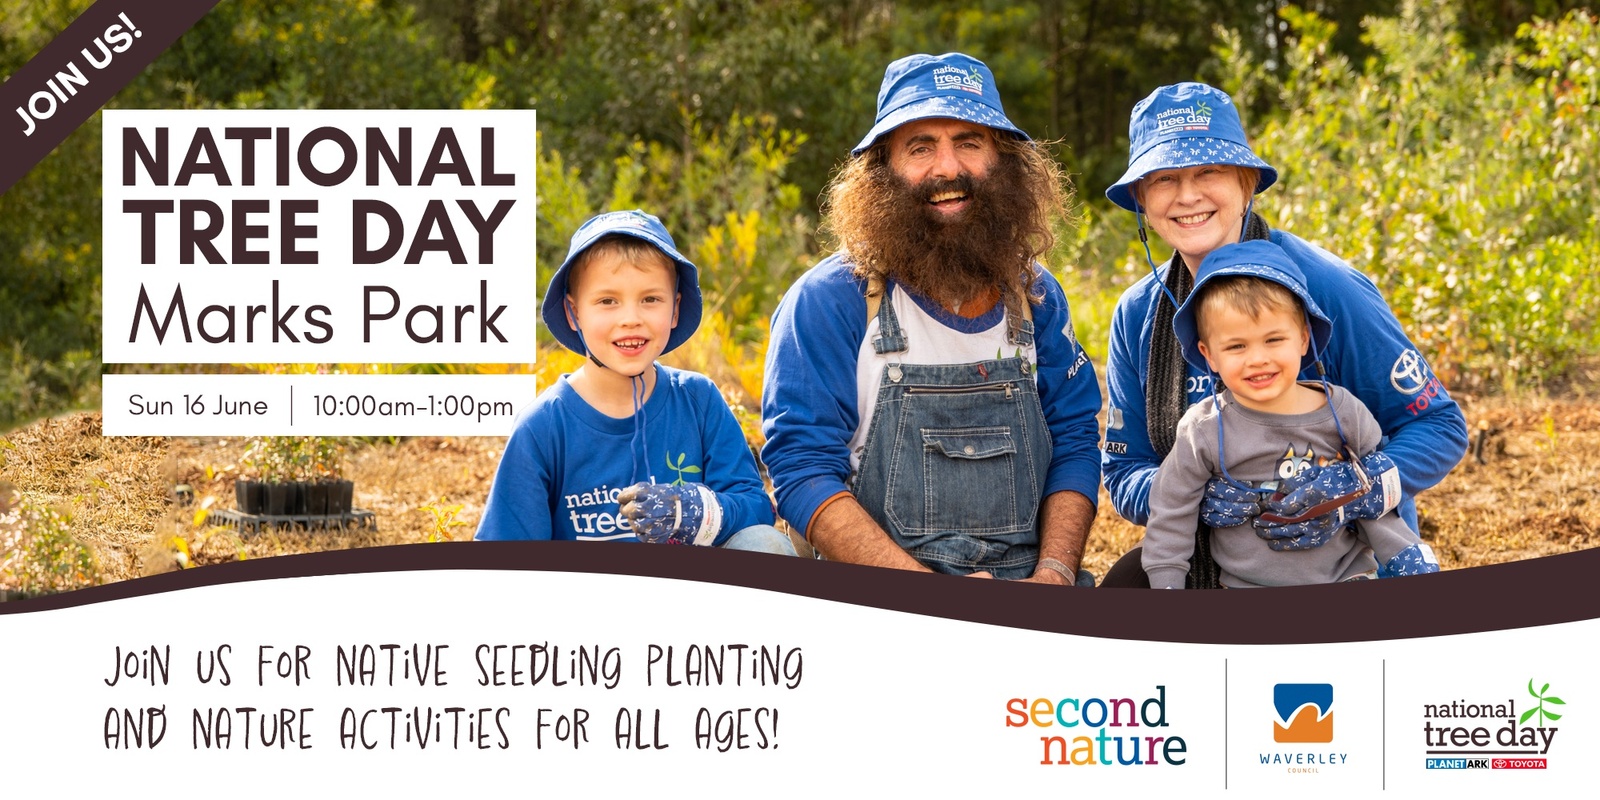 Banner image for National Tree Day at Marks Park